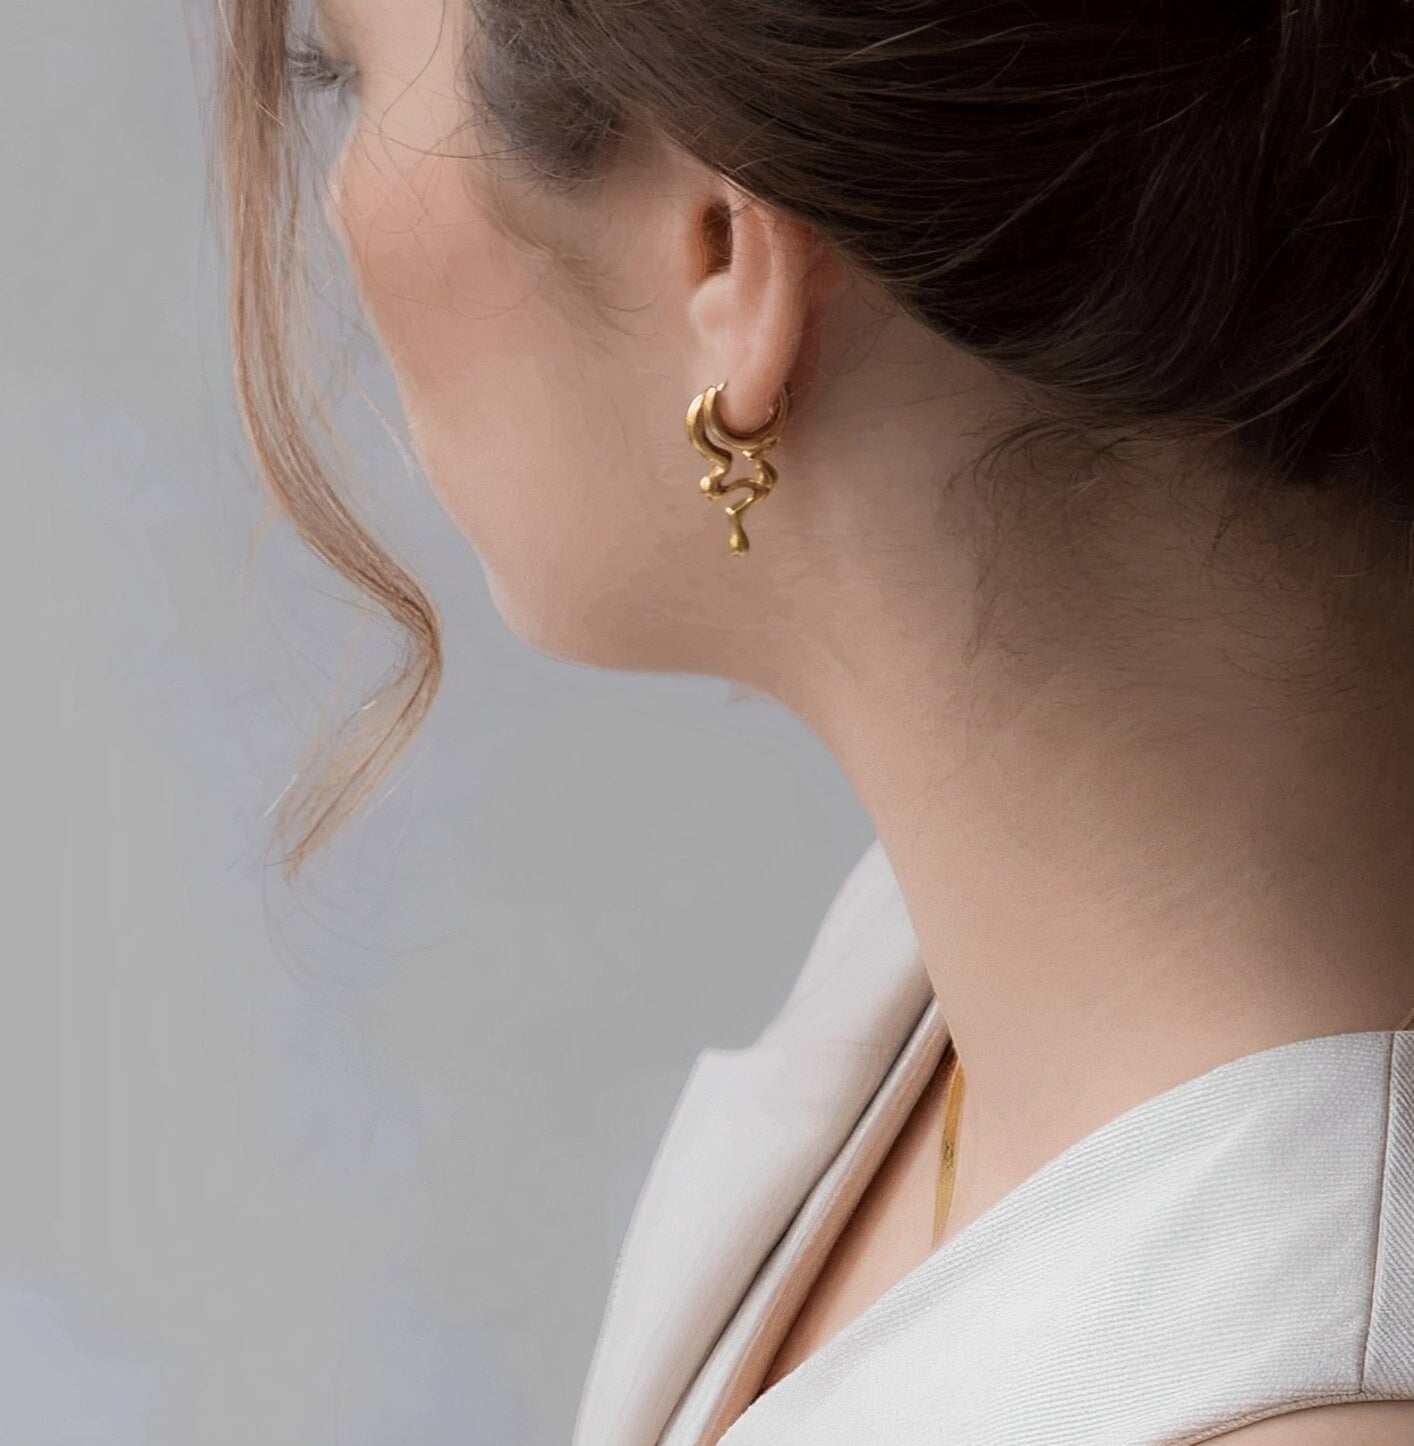 ALIO EARRINGS earing Yubama Jewelry Online Store - The Elegant Designs of Gold and Silver ! 